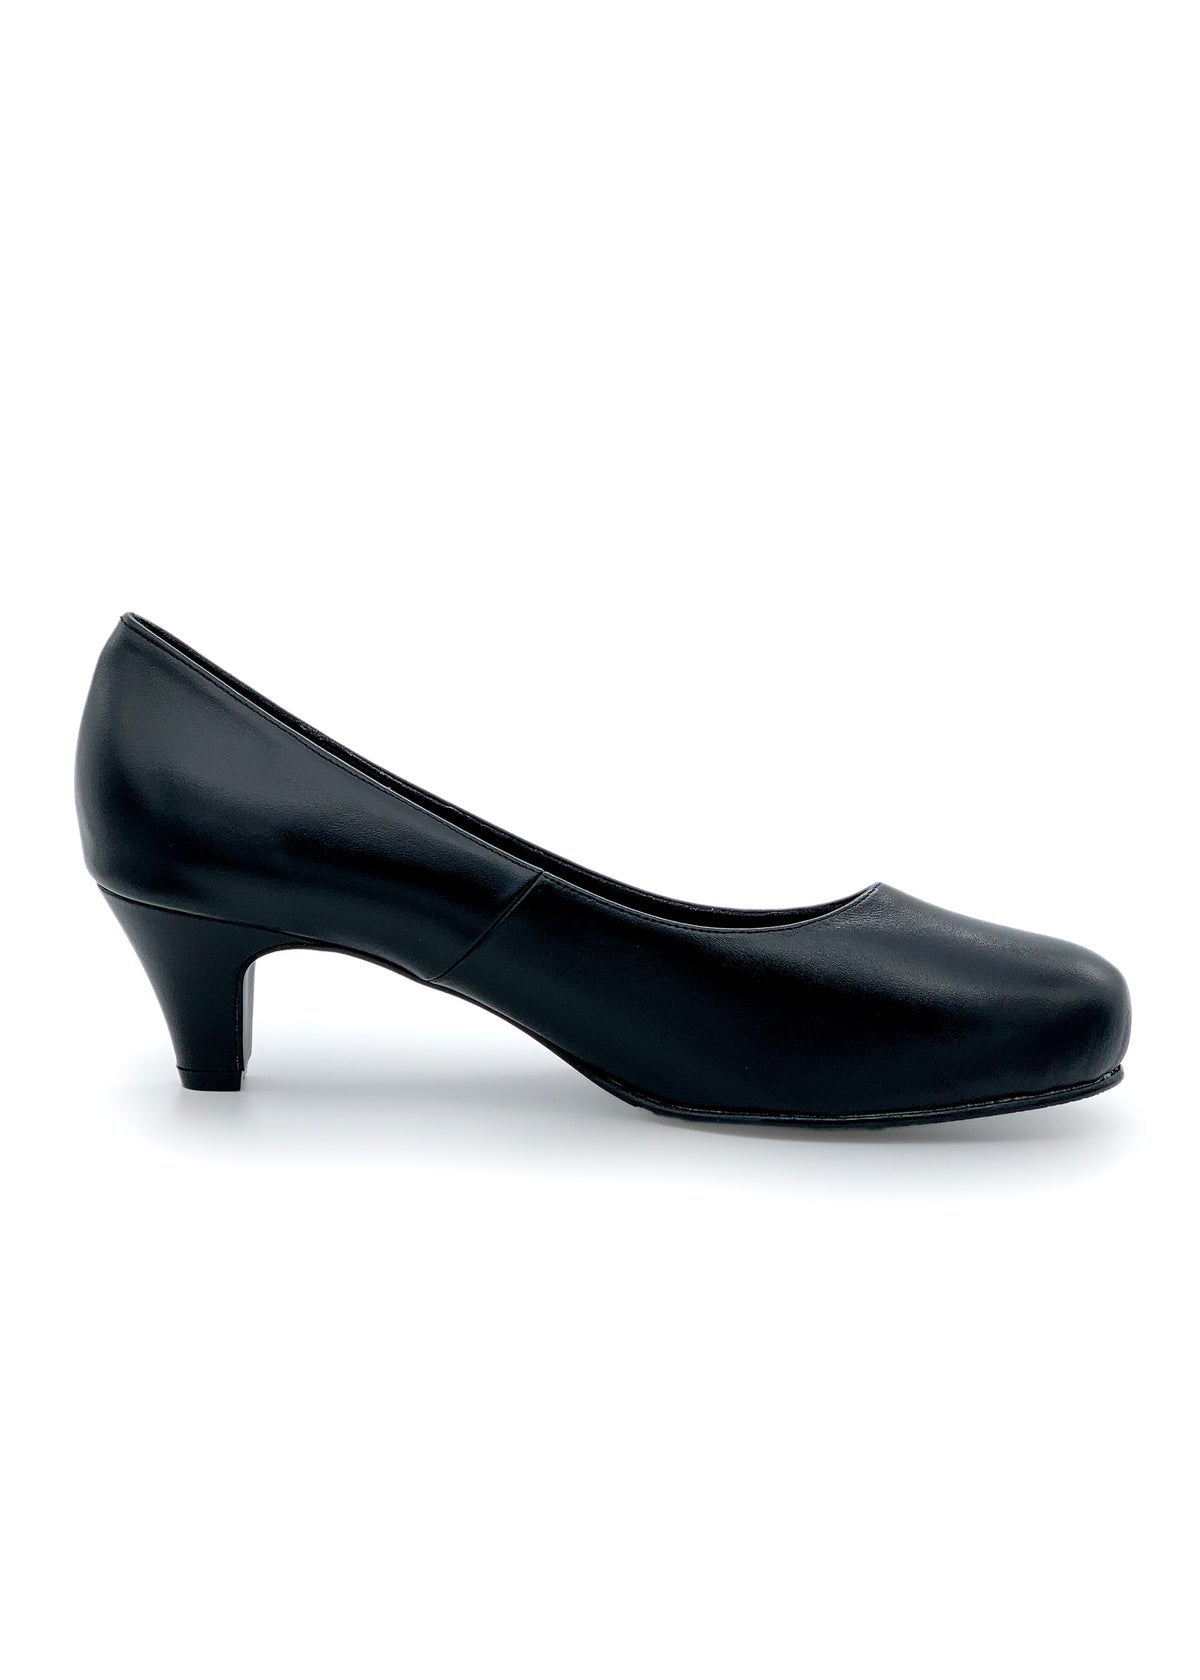 Open-toed shoes - black, wide lace